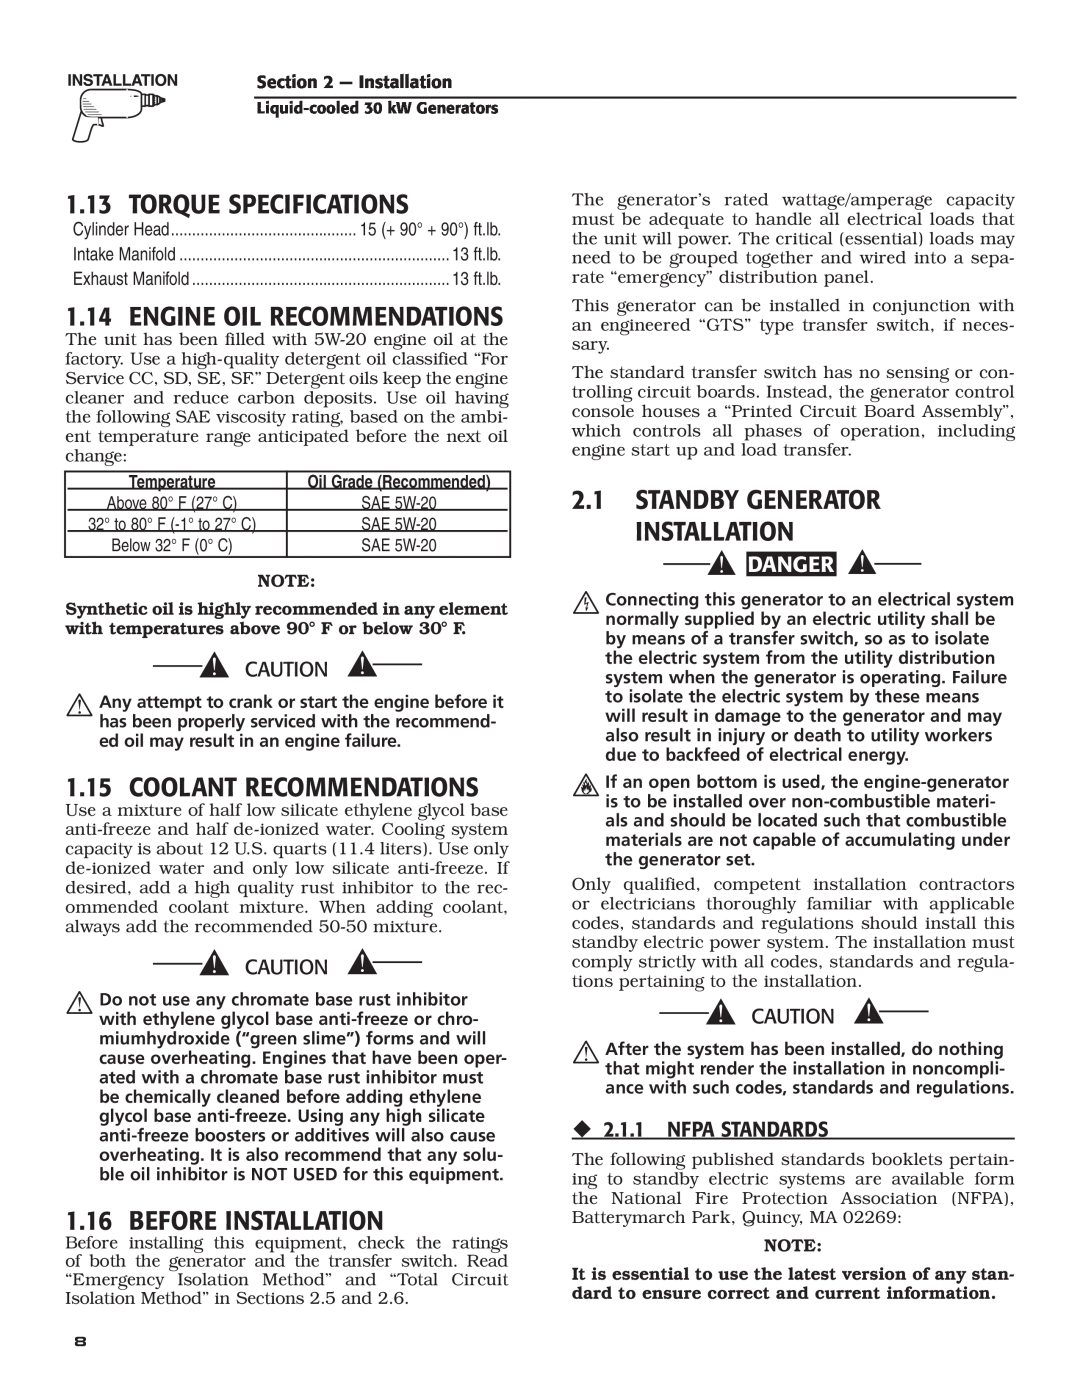 Generac Power Systems 004988-4 Torque Specifications, Engine Oil Recommendations, Standby Generator Installation, 13 ft.lb 